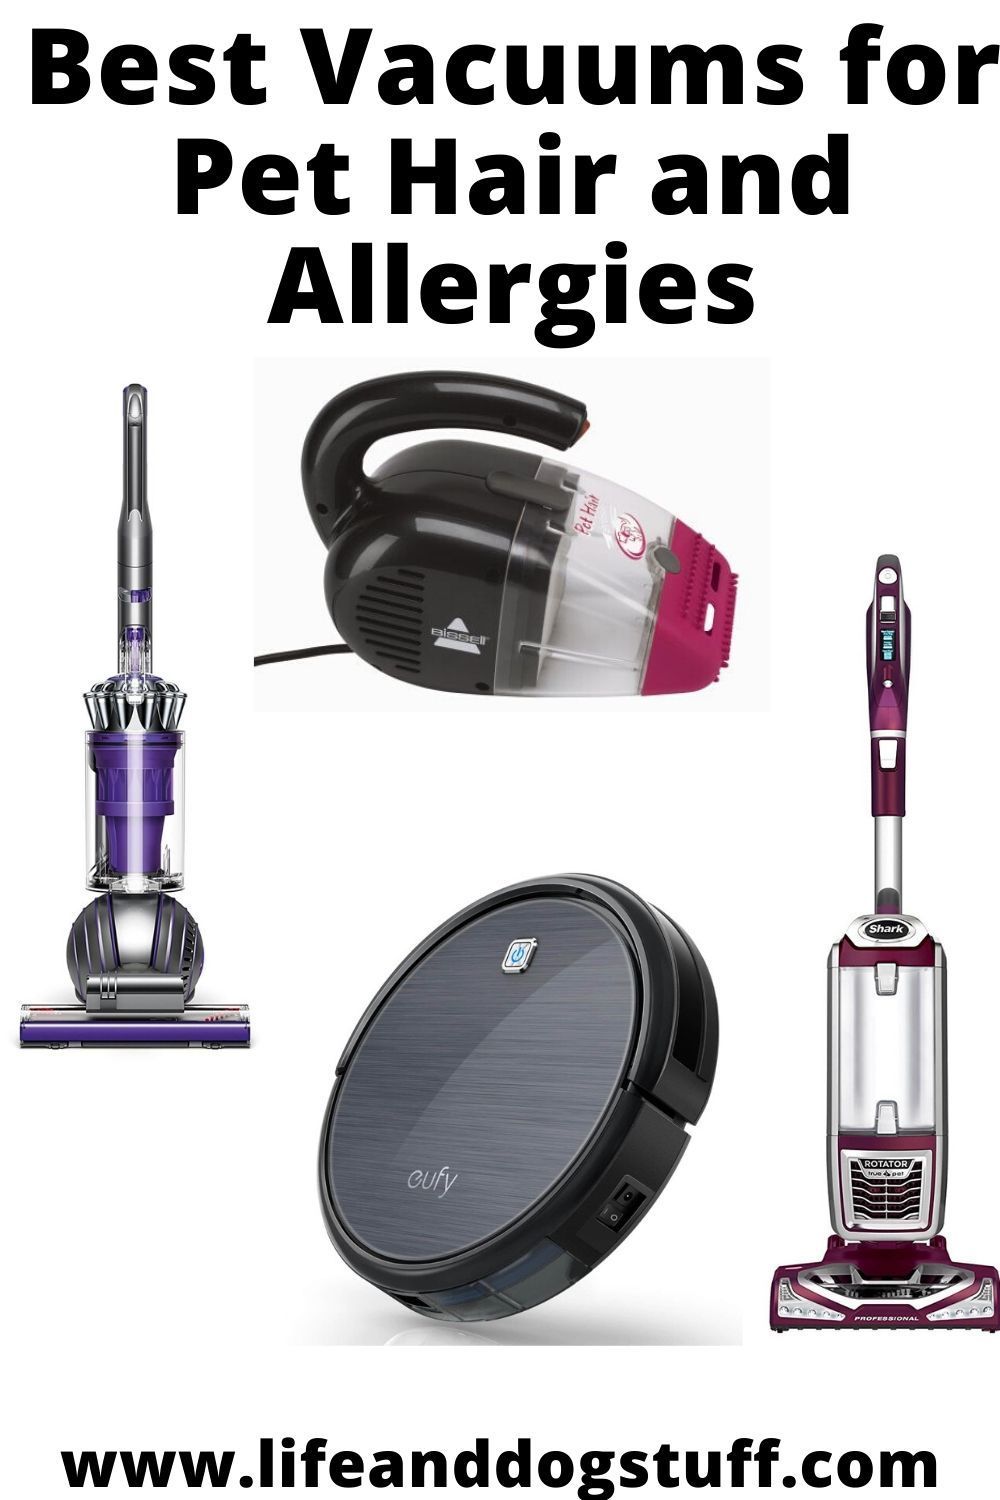 Best Vacuums for Pet Hair and Allergies